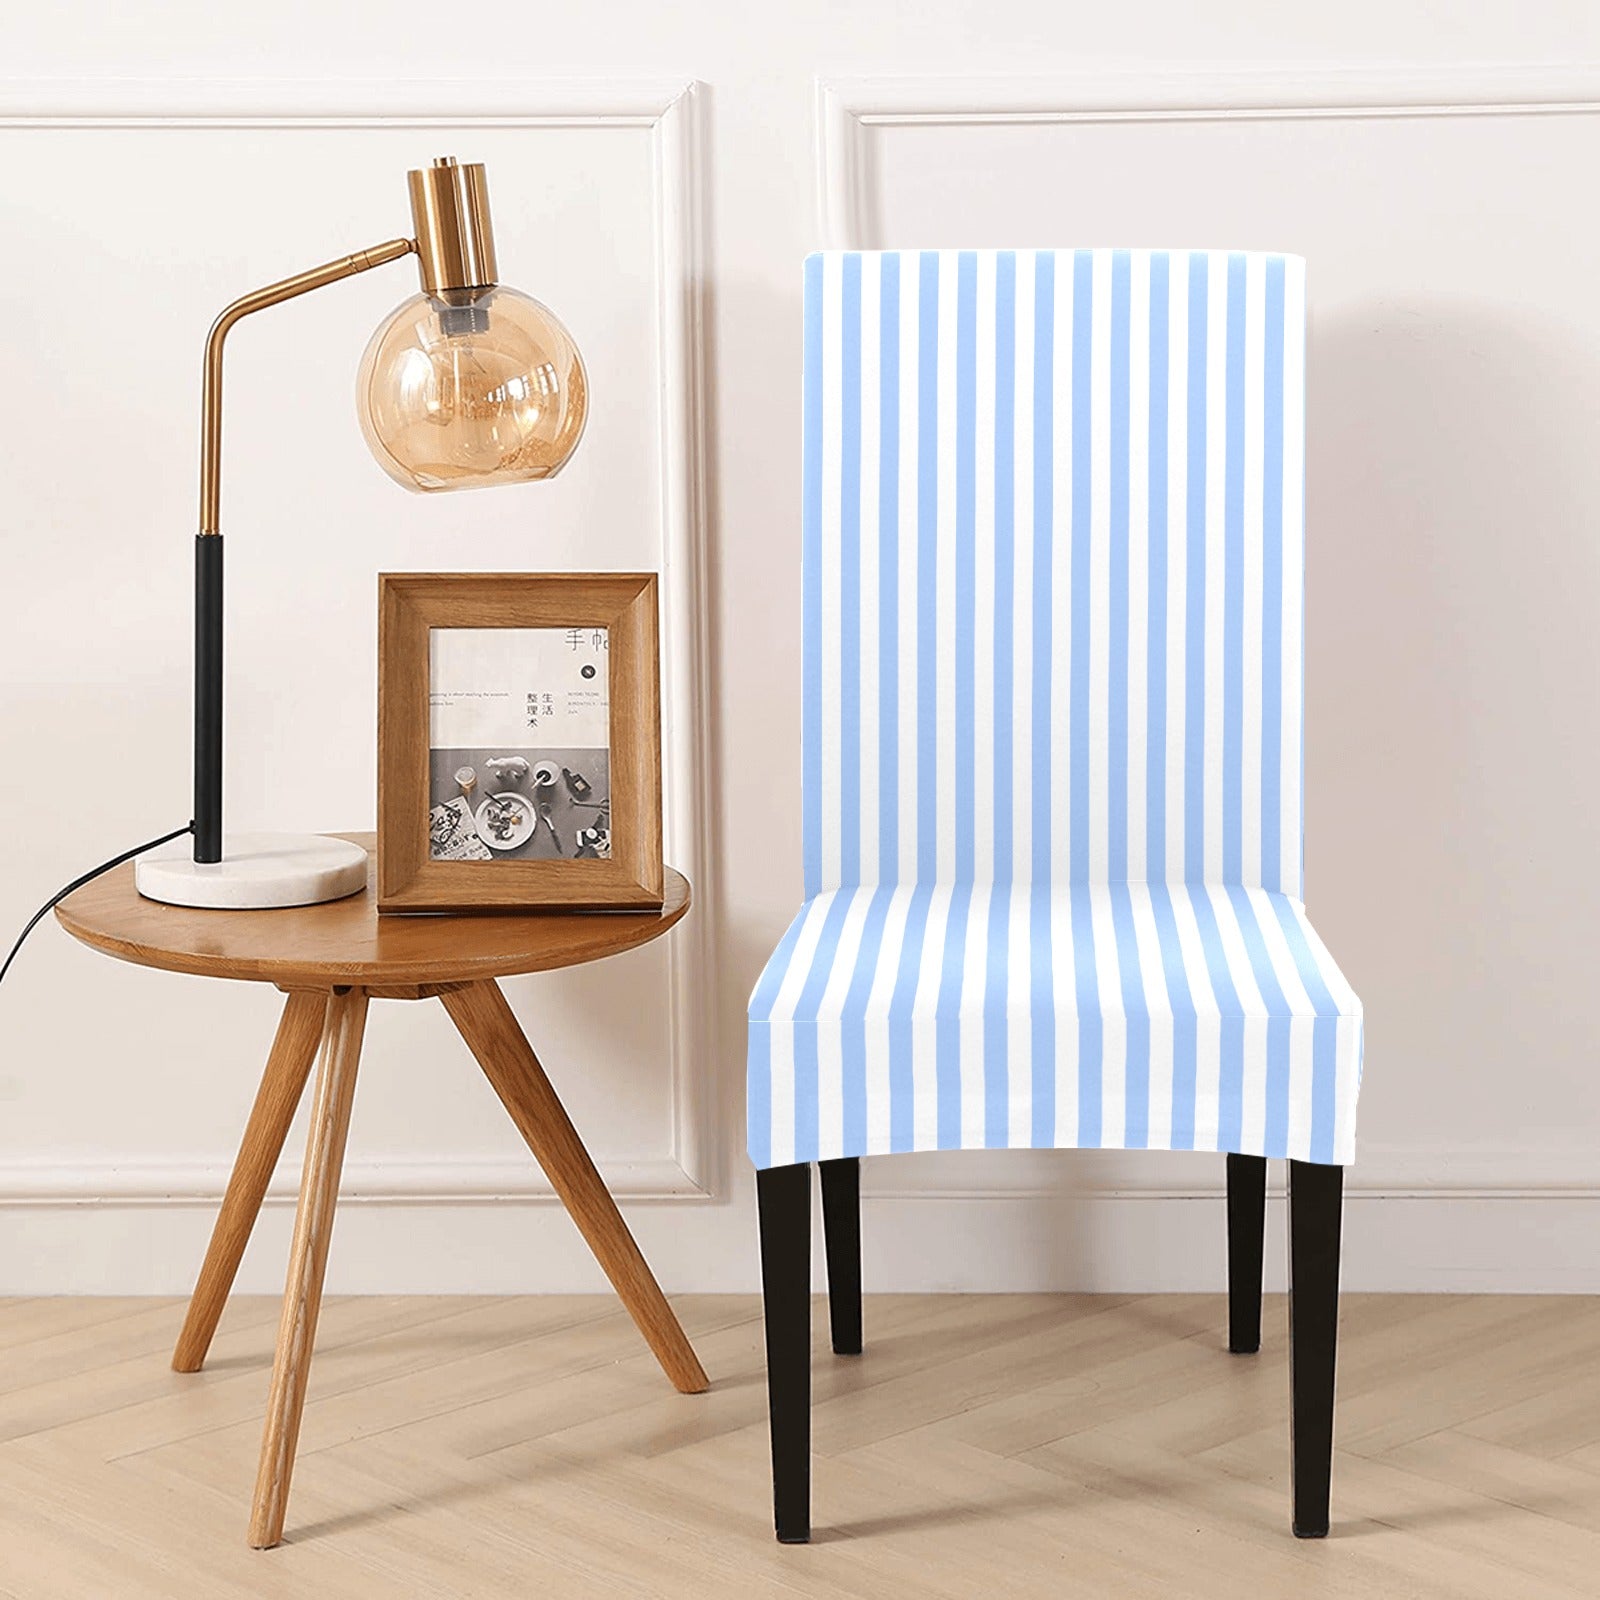 Light Blue Striped Dining Chair Seat Covers, White Stretch Slipcover Furniture Dining Room Party Banquet Home Decor Spandex Starcove Fashion